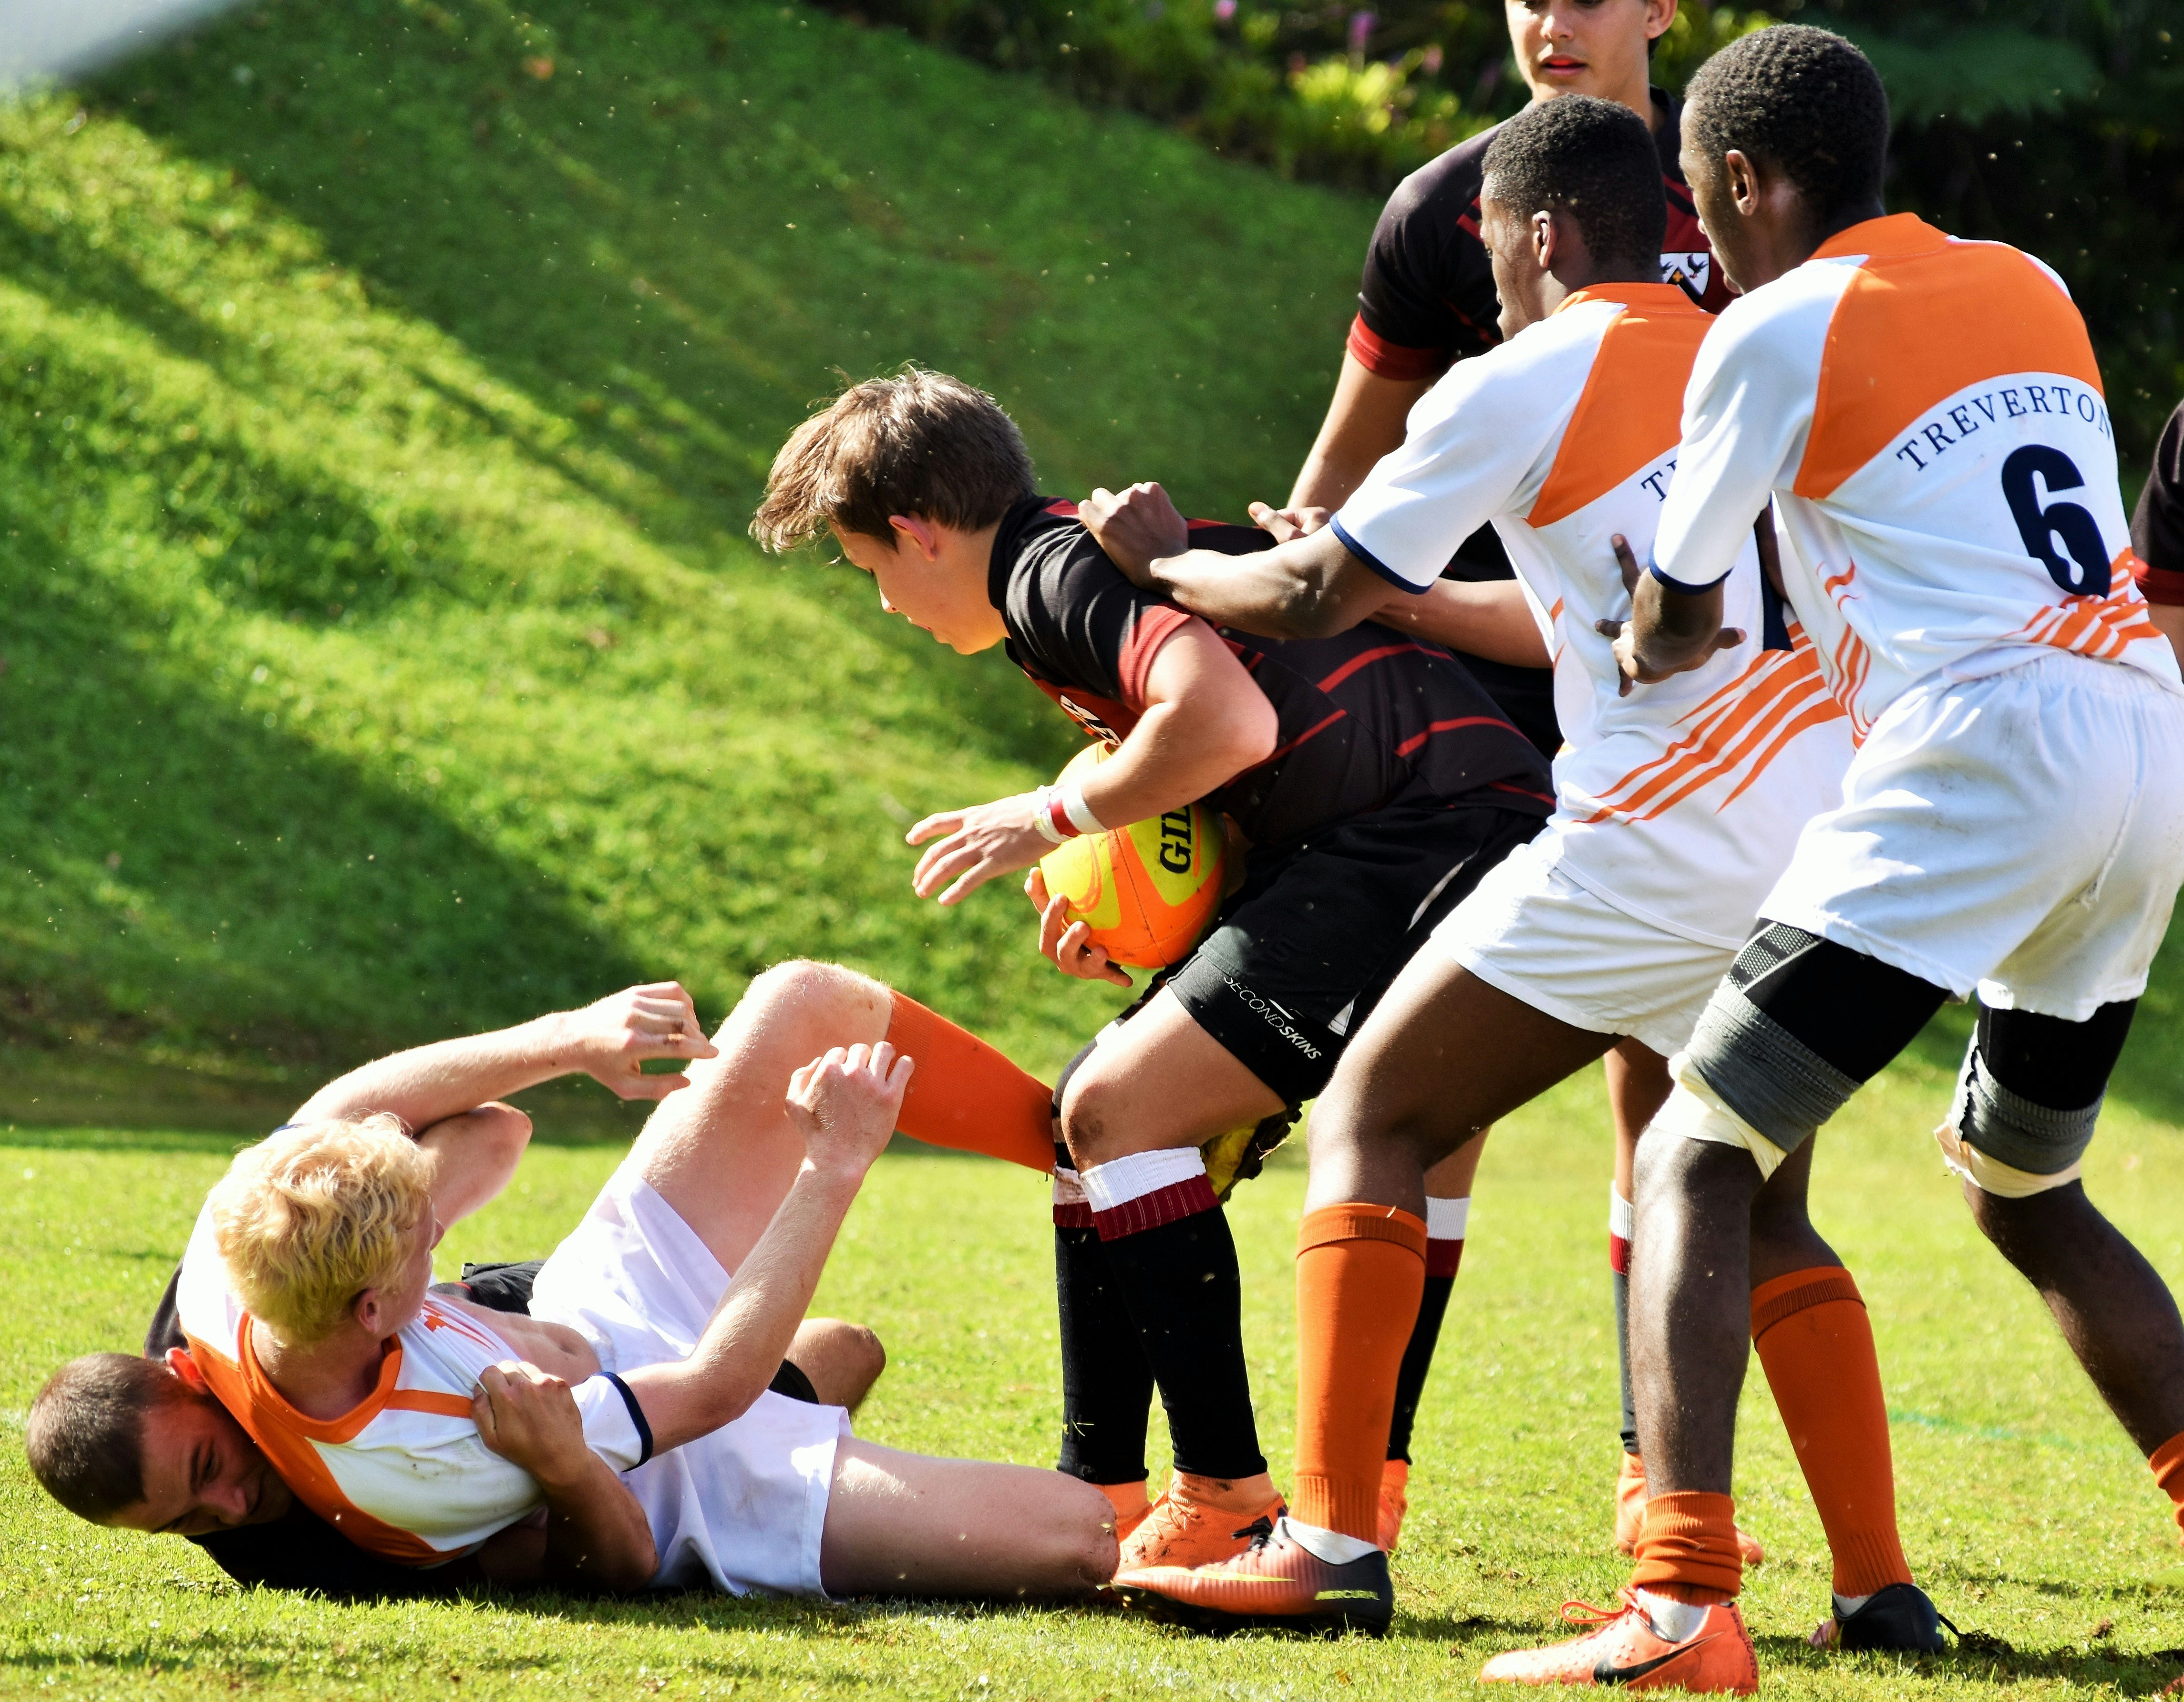 A player is roughly dragged to the ground to prevent him snatching the ball from the opposition team during a game of schoolboy rugby while his team mates try to tackle from behind.